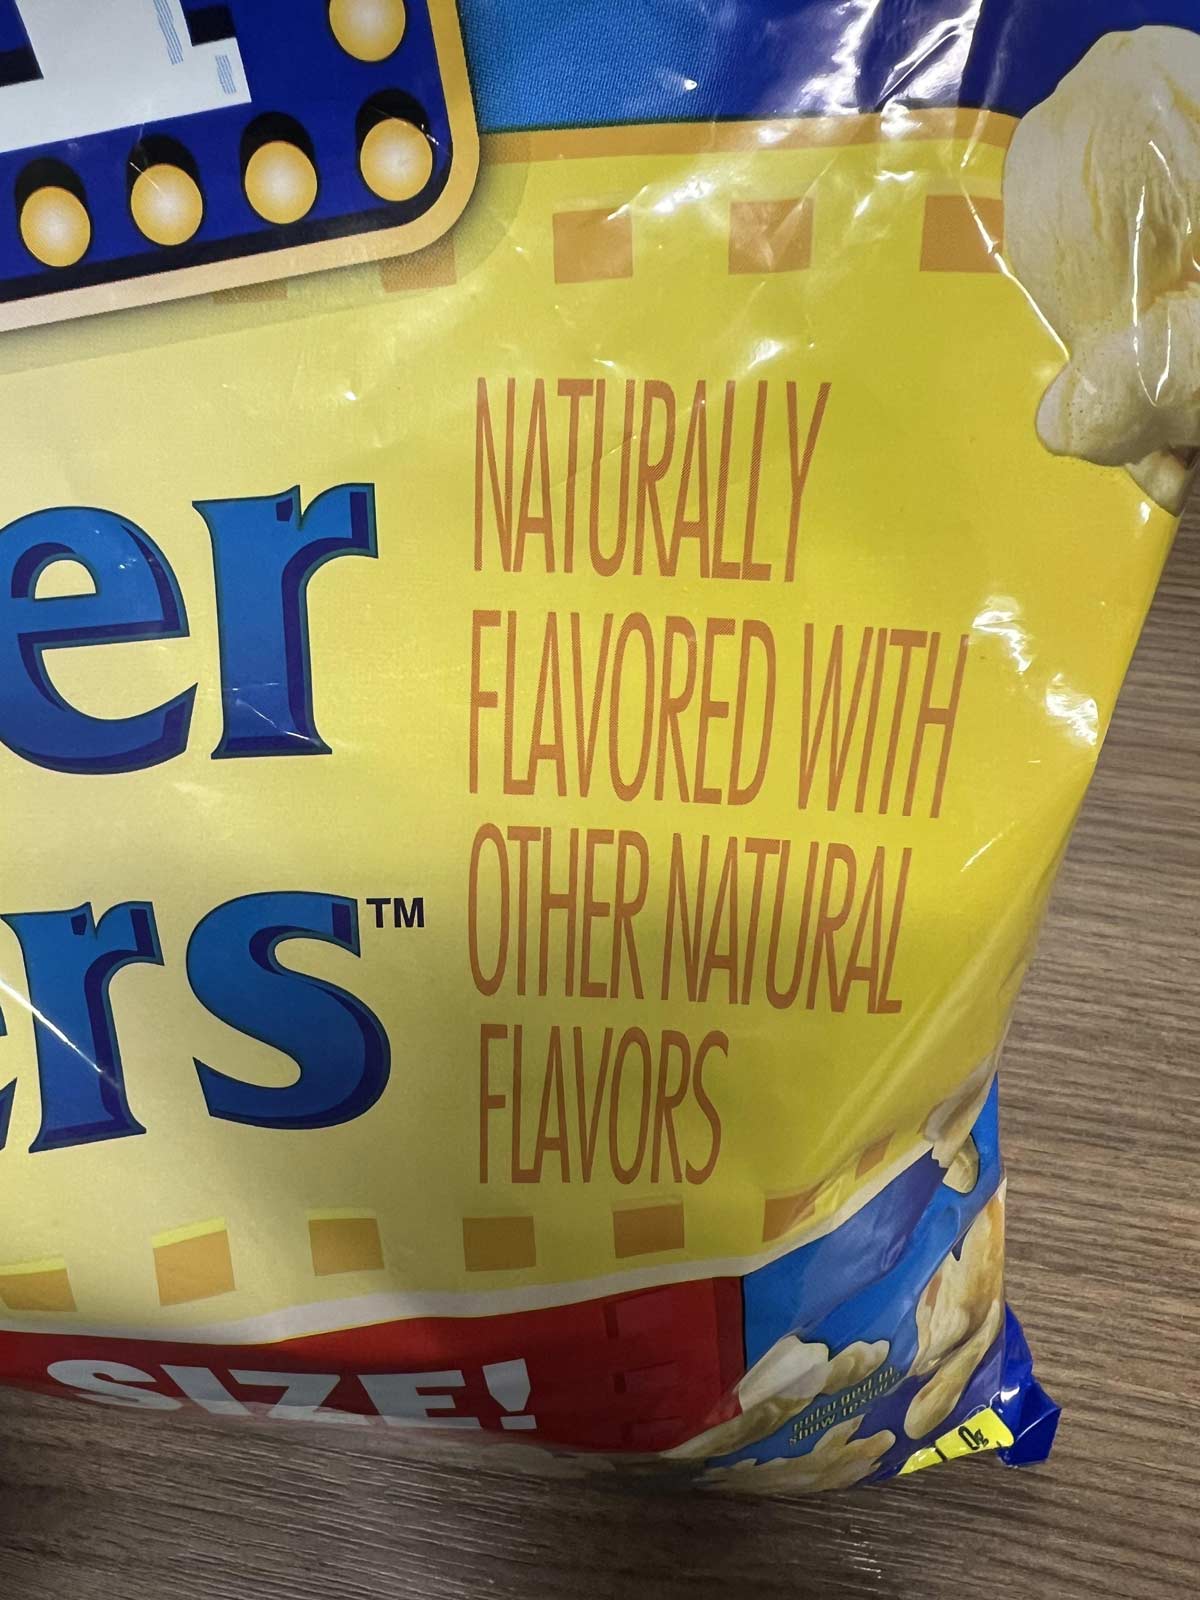 Ahh yes the most natural flavor taste